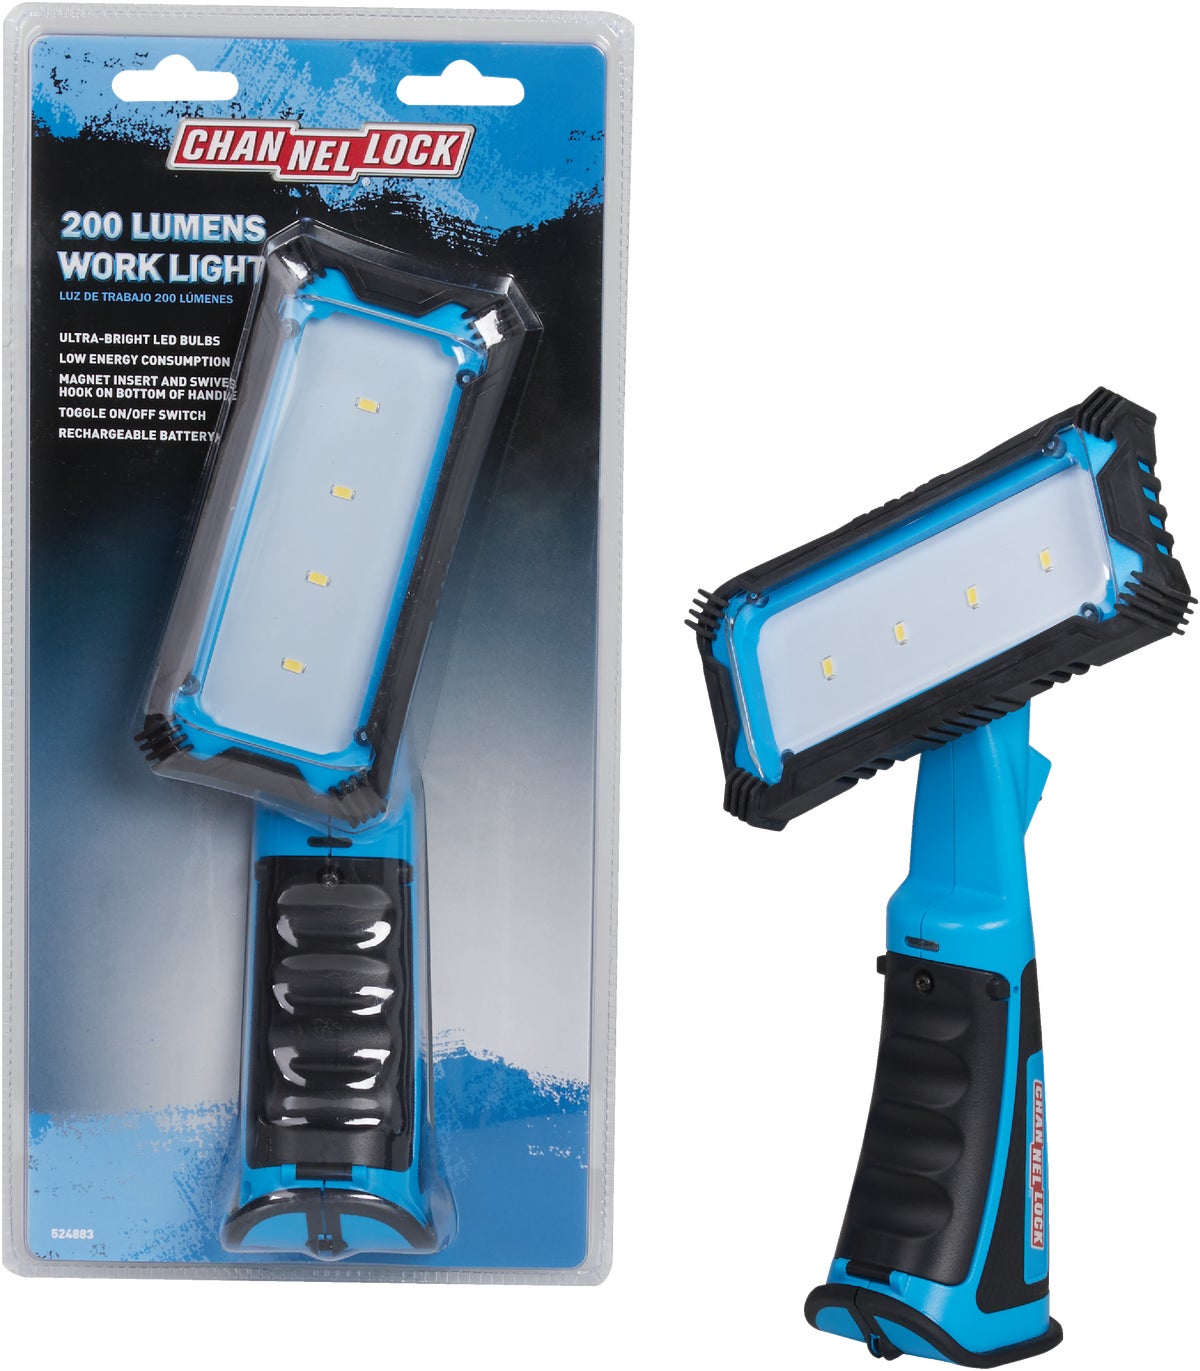 The Trouble Free™ LED Work Light